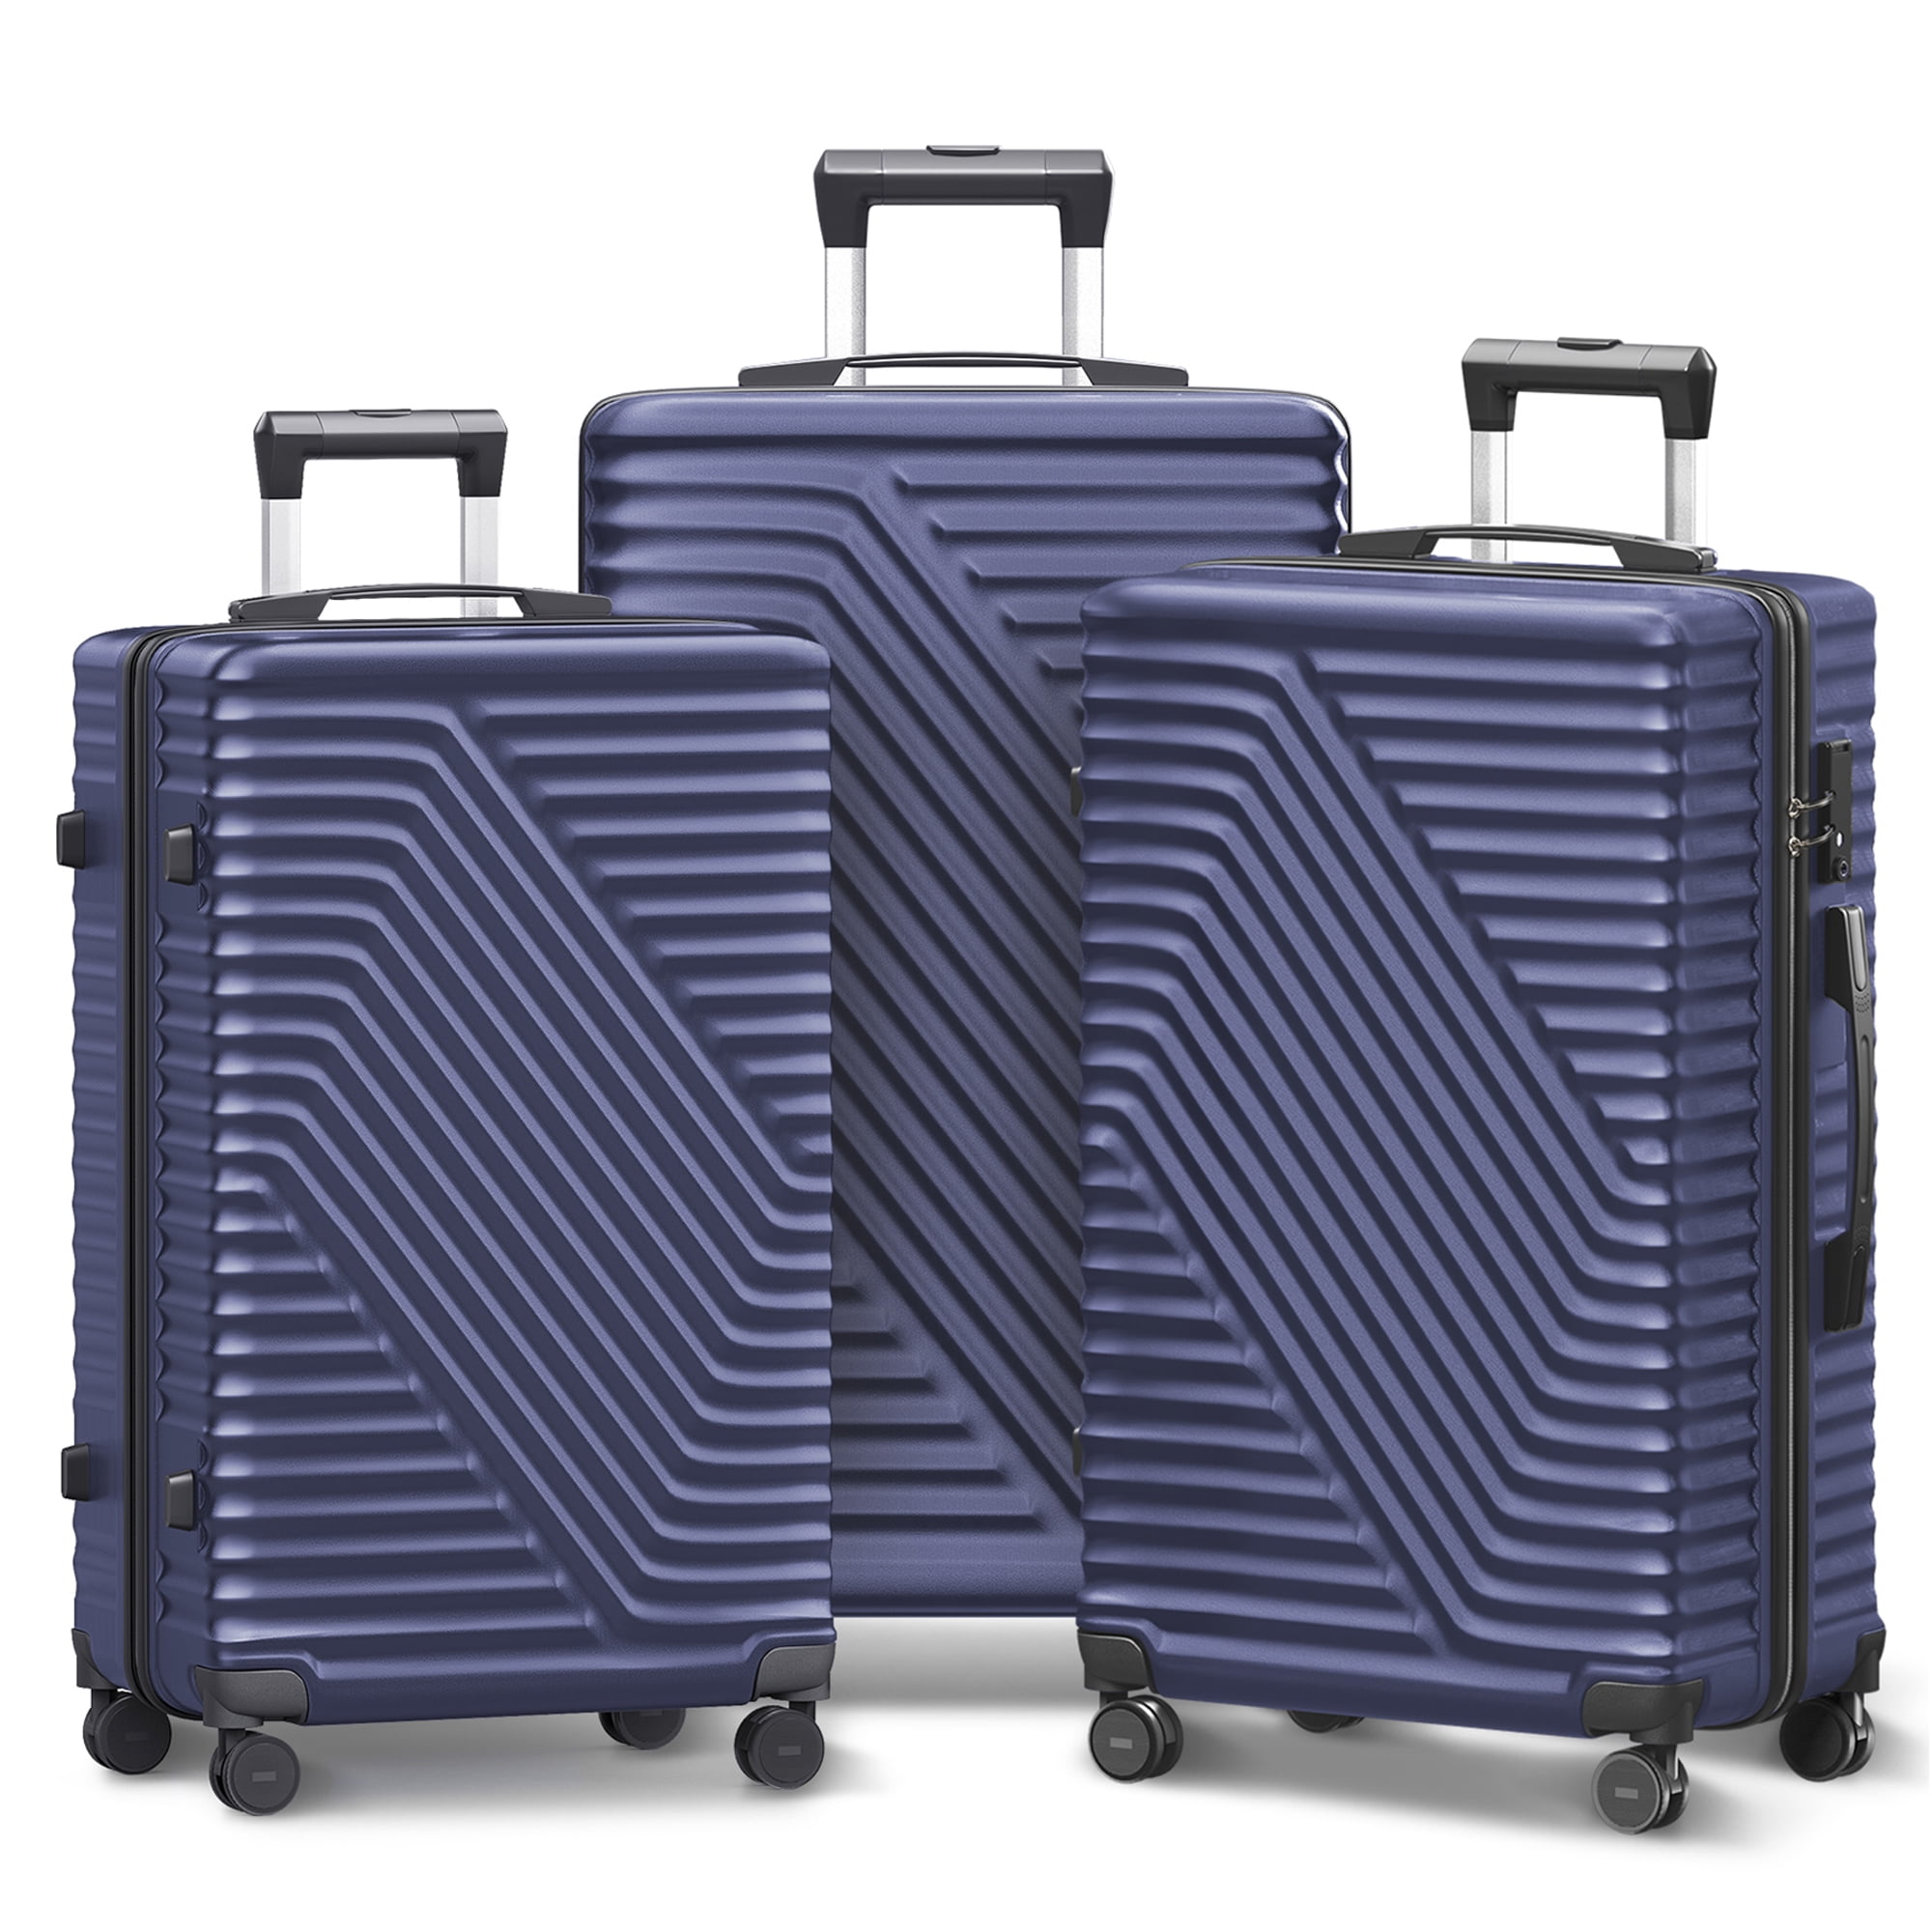 Vebreda 3 Piece Luggag Sets Nested Spinner Suitcase with TSA Lock and 360°  Spinner Wheels 20/24/28 inch Suitcase Sets, Blue 